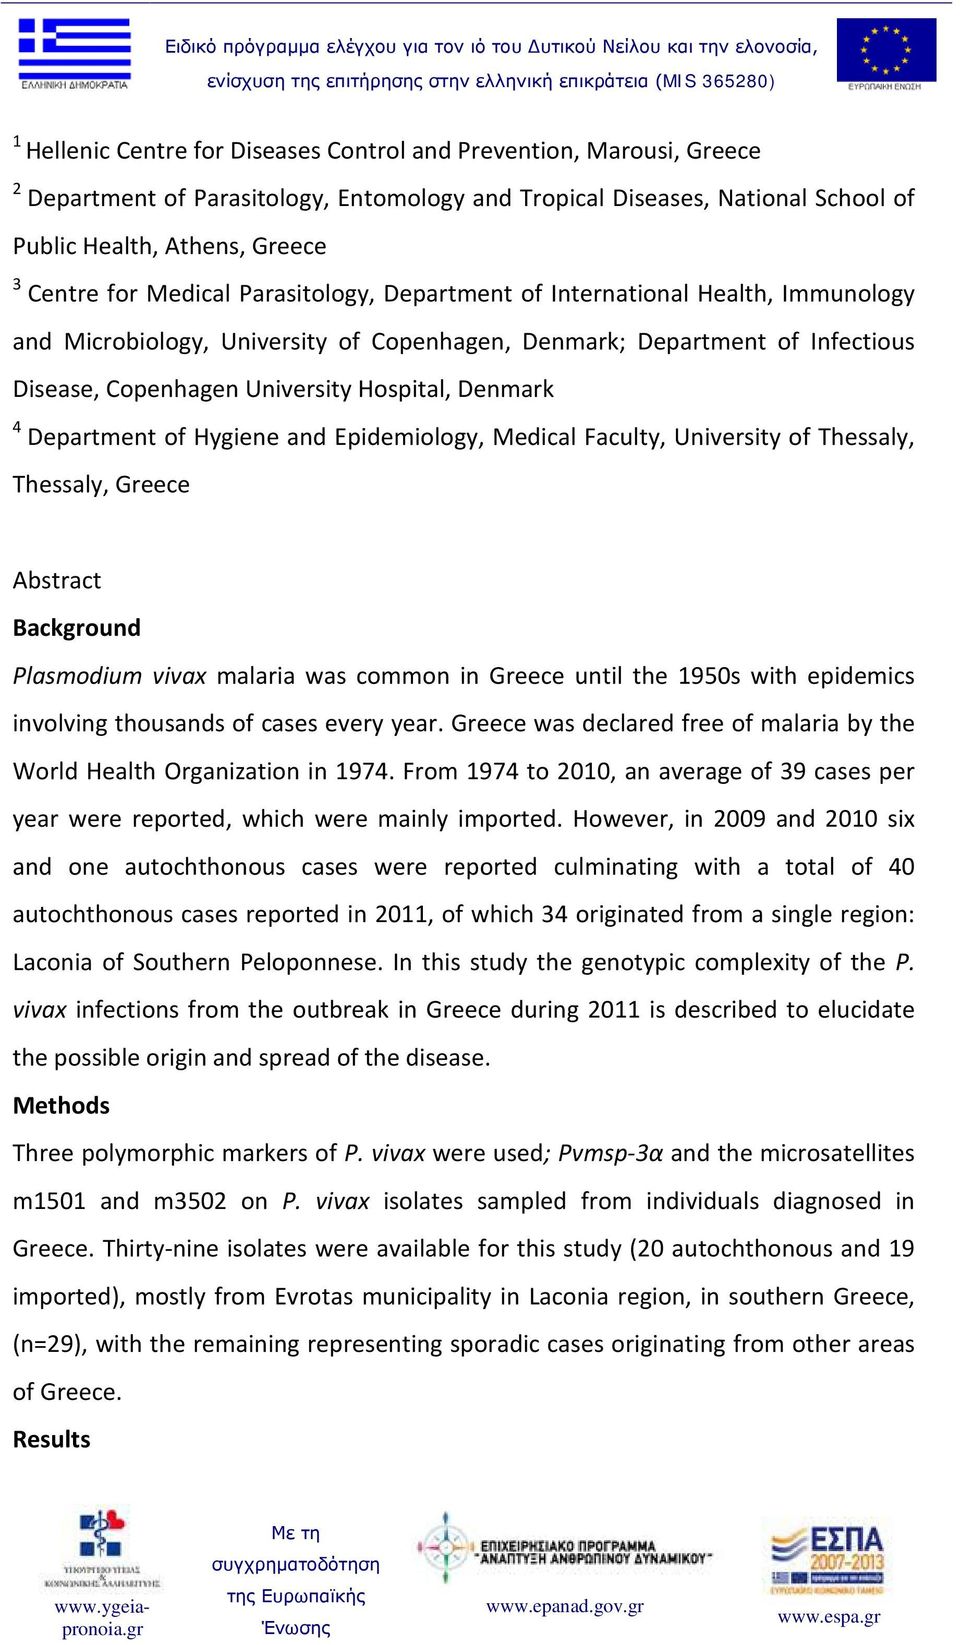 Department of Hygiene and Epidemiology, Medical Faculty, University of Thessaly, Thessaly, Greece Abstract Background Plasmodium vivax malaria was common in Greece until the 1950s with epidemics